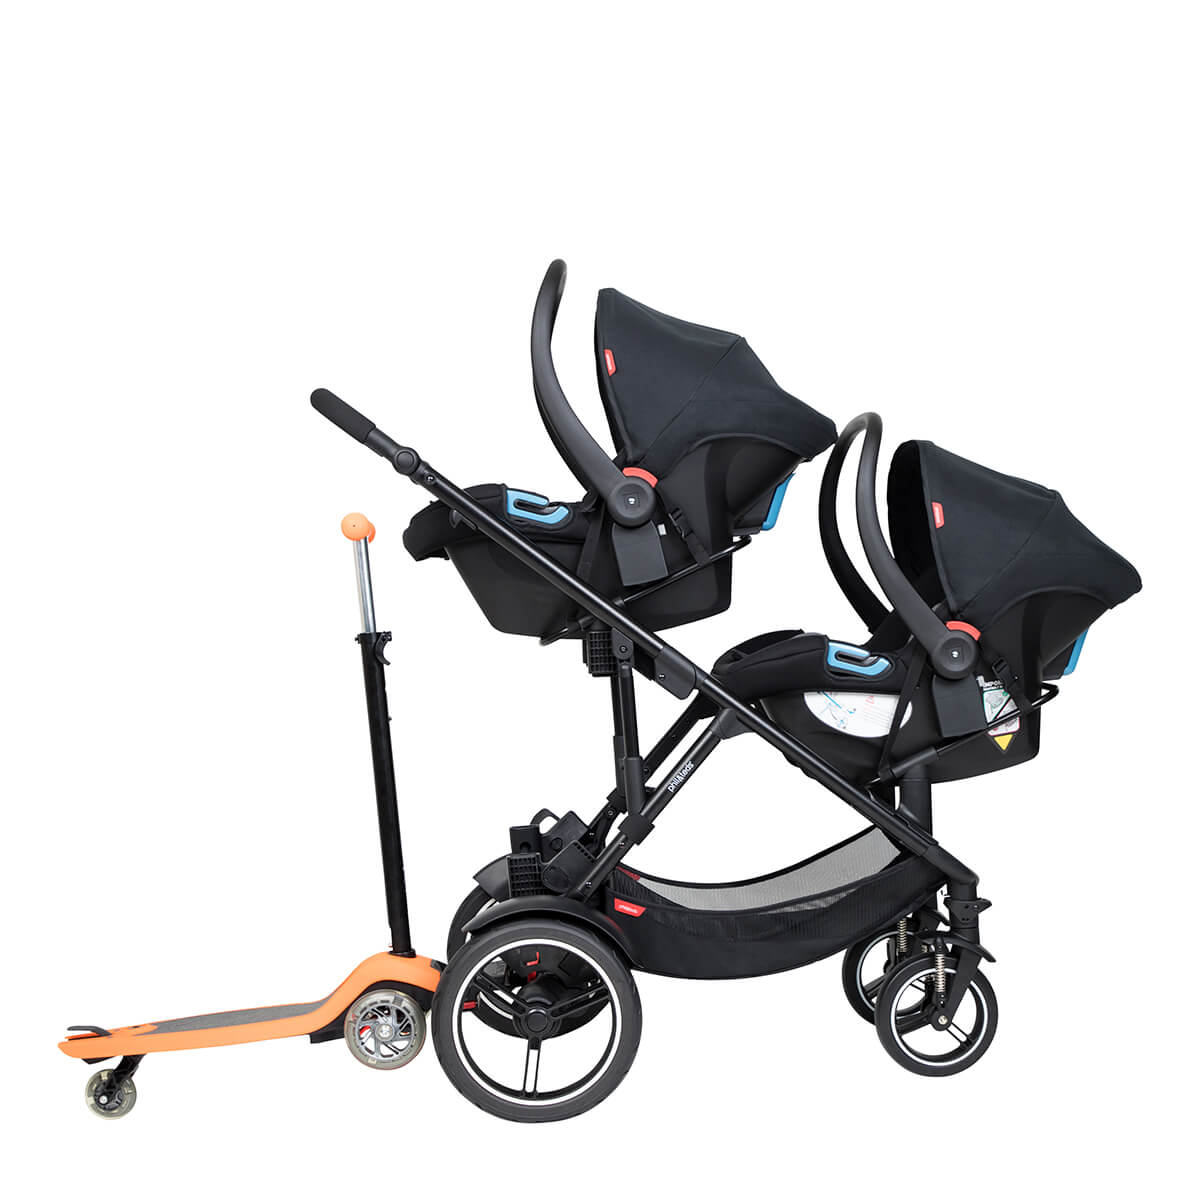 https://cdn.accentuate.io/4343378575394/19438665367730/philteds-voyager-buggy-with-double-travel-systems-and-freerider-stroller-board-in-the-rear-v1633400012766.jpg?1200x1200